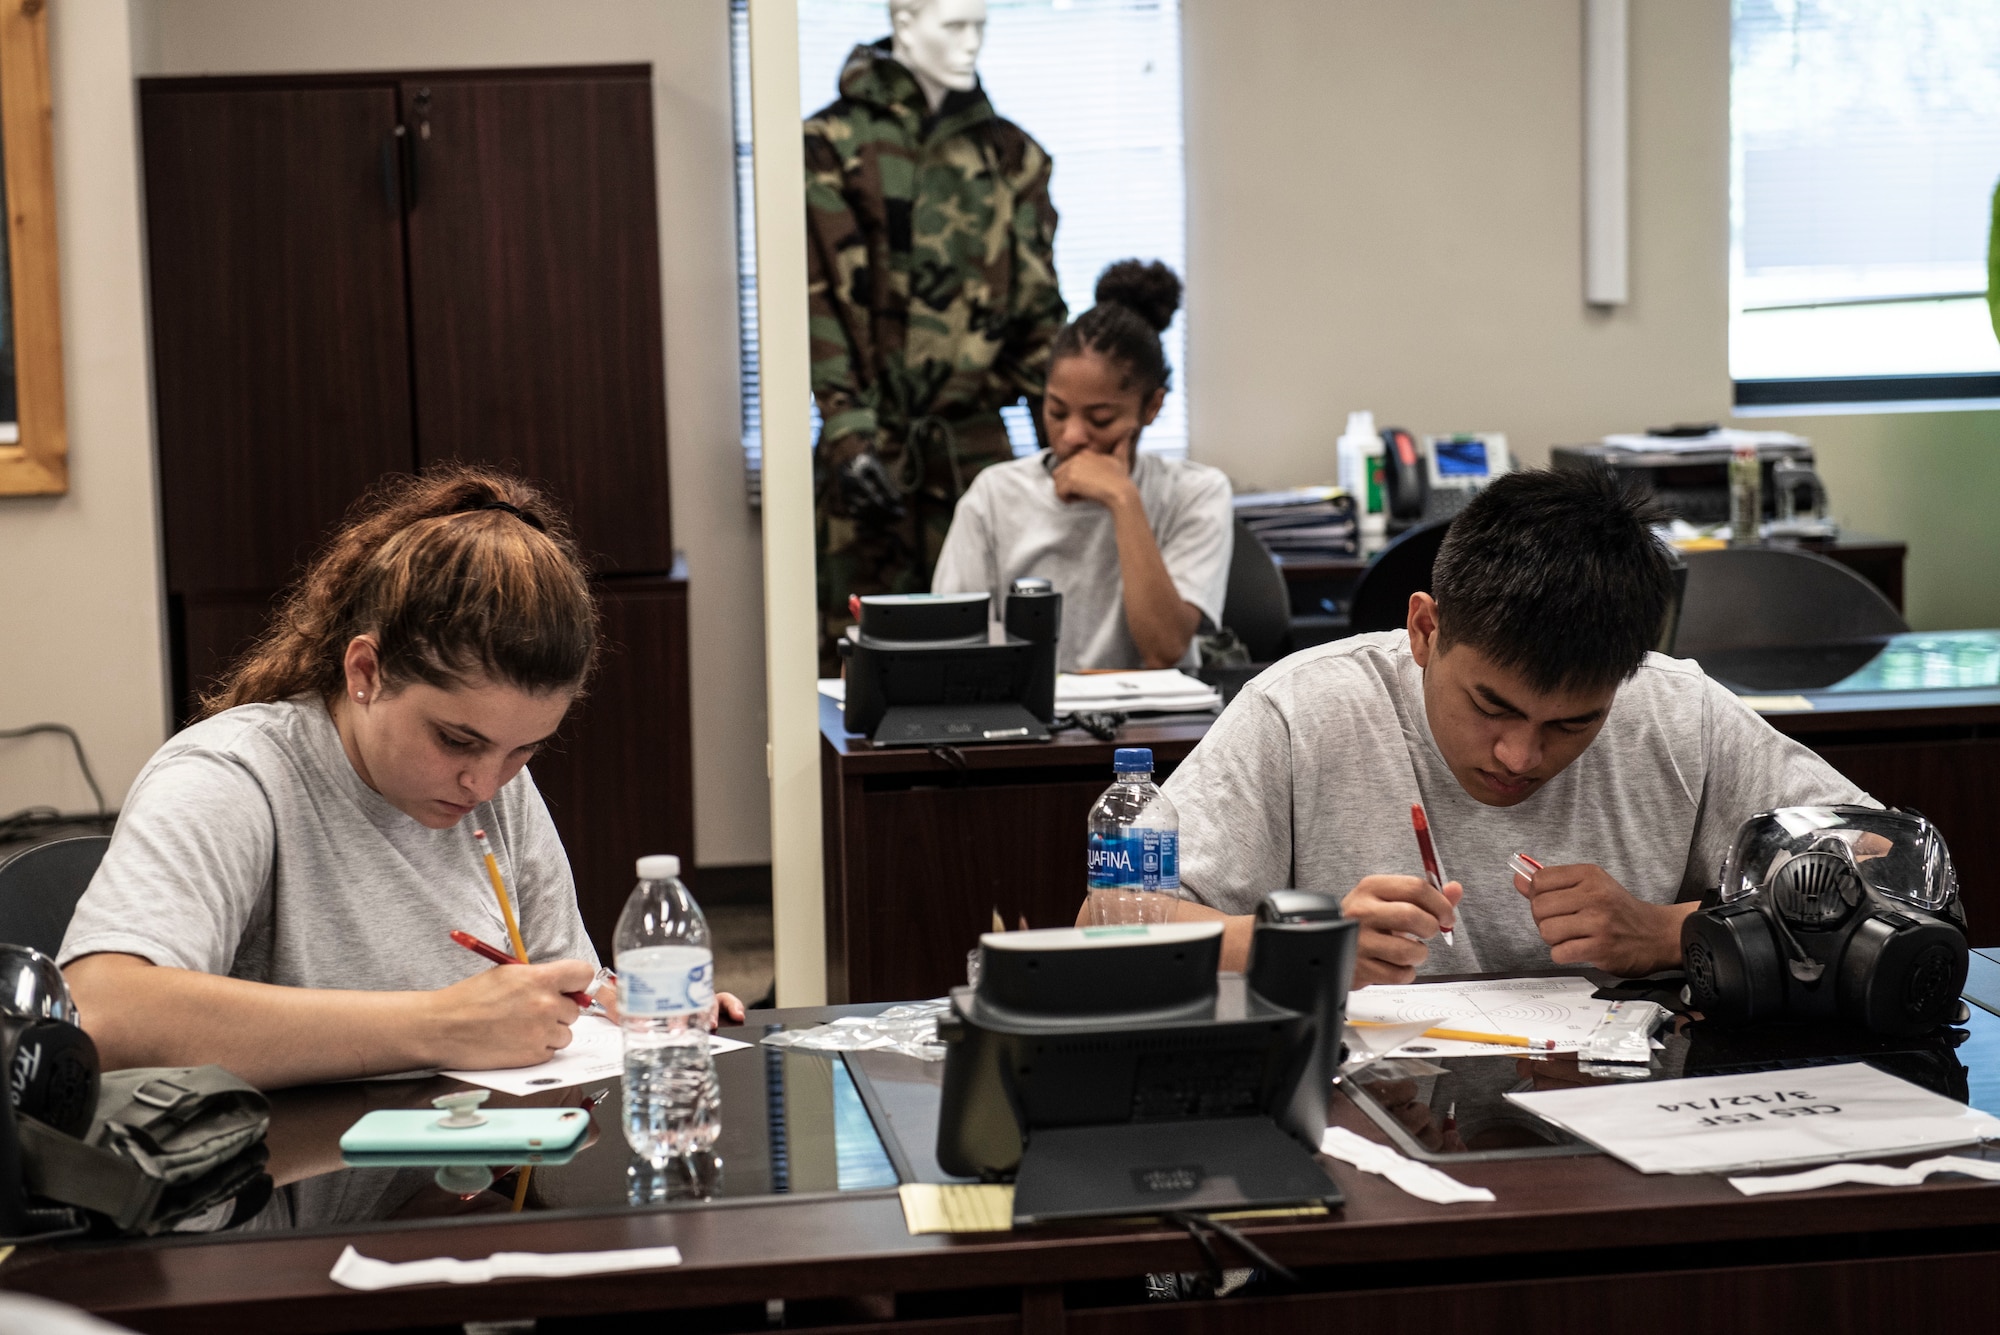 U.S. Air Force Airman 1st Class Zaria Smith, left, Airman 1st Class Kailee Johnson, middle, and Airman Angelo Madrazo, 20th Civil Engineer Squadron emergency management technicians, complete an eight-legged radiological survey at Shaw Air Force Base, S.C., Aug. 29, 2018.